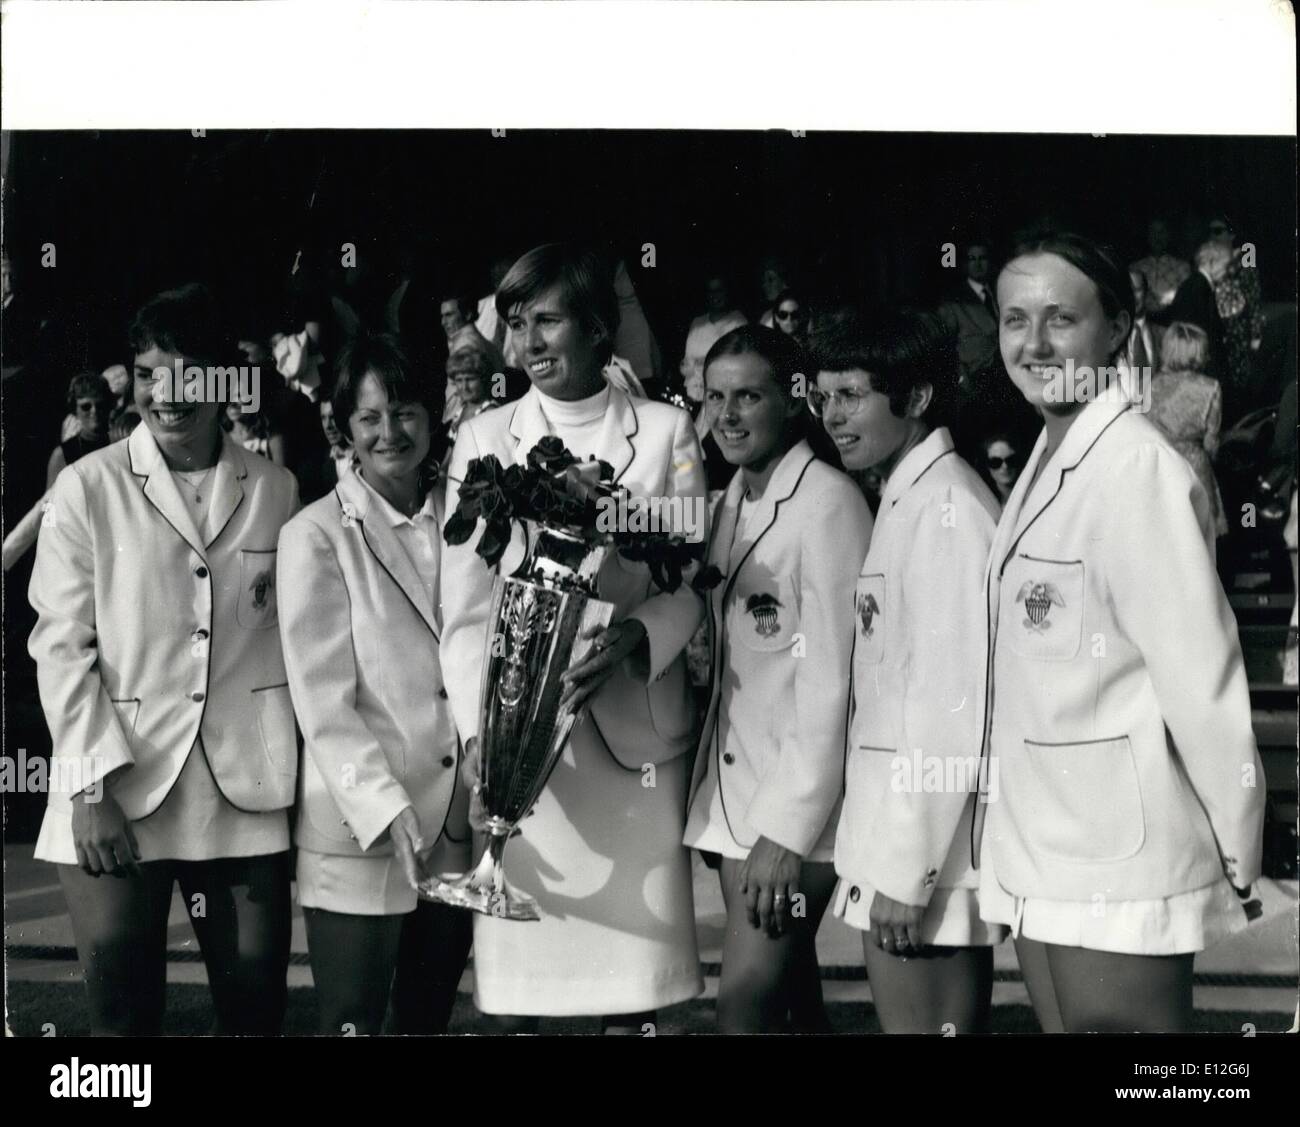 Jan. 09, 2012 - Wightman Cup at Wimbledon USA Beat England 4-3: Picture Shows: The Winning Wightman Cup Team with the Trophy after beat Britain by 4-3 at Winbledon today. L-R. Miss Heldman , Miss Richey, Doris Hart, Capt, Miss Curtis Billie- Jean King, and Miss Bartkowicz. Stock Photo